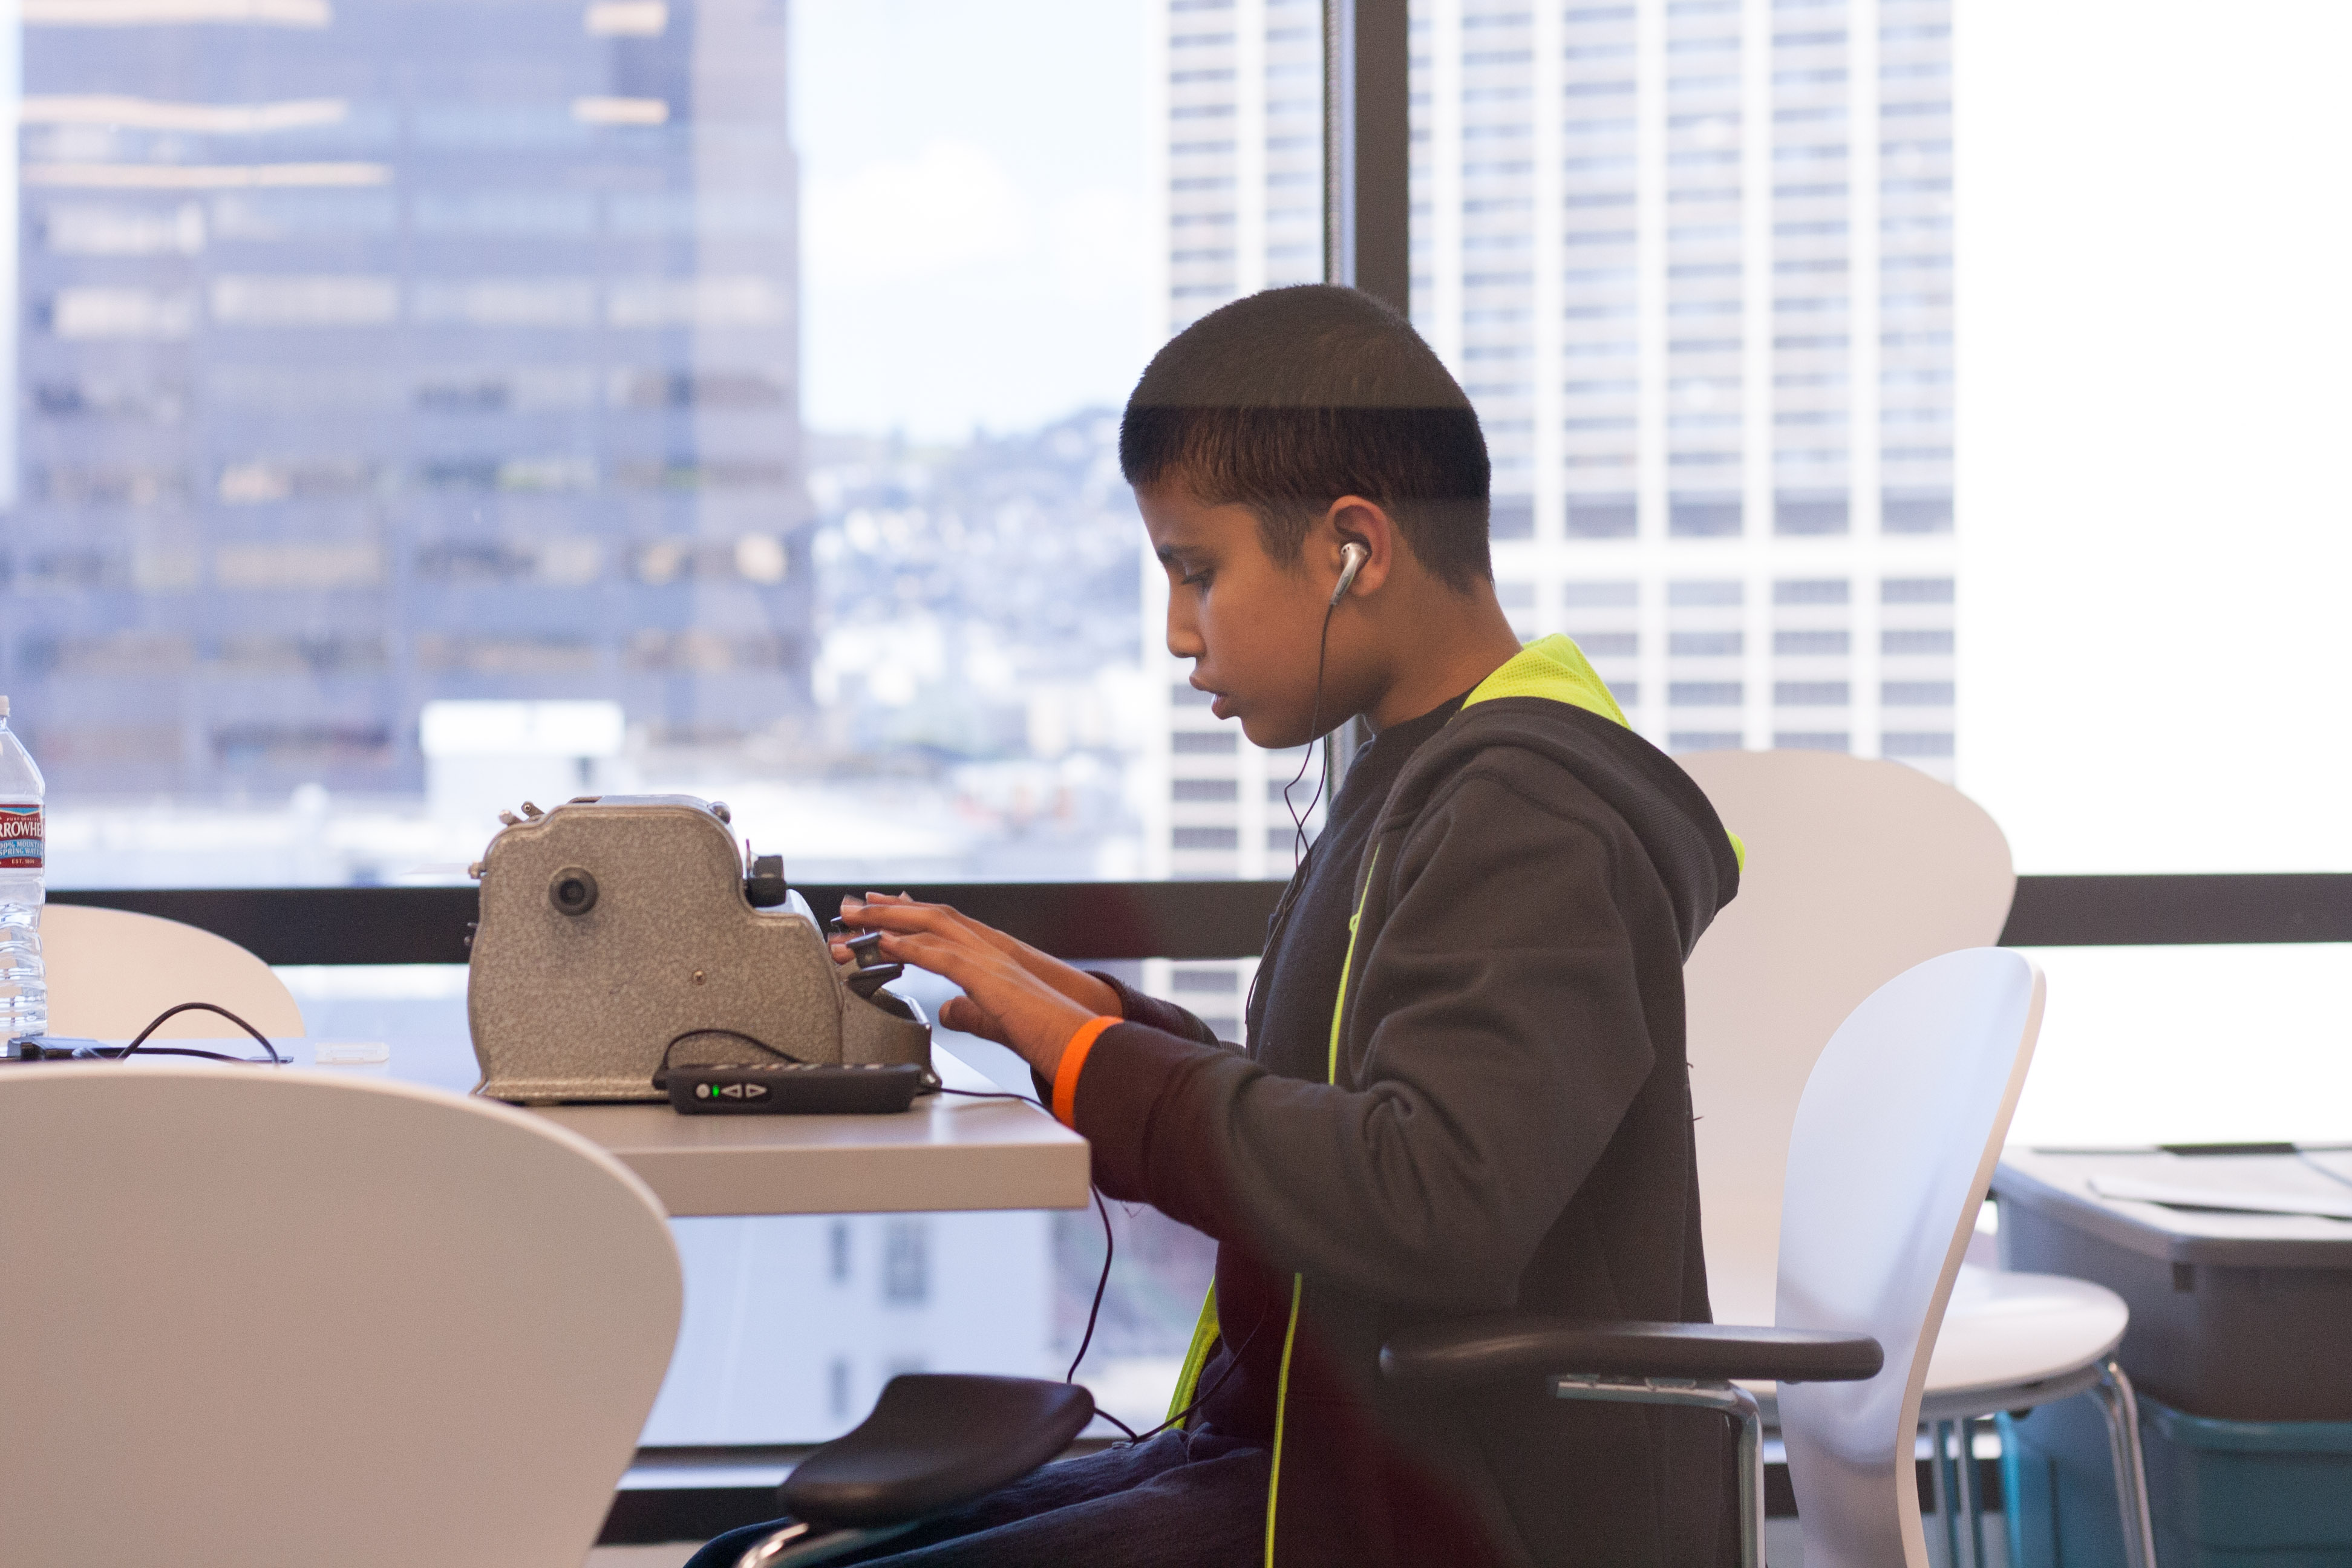 Competitor Rasheed sits typing at his brailler with headphones in. He is silhouetted against large windows that show the buildings of San Francisco in the background.